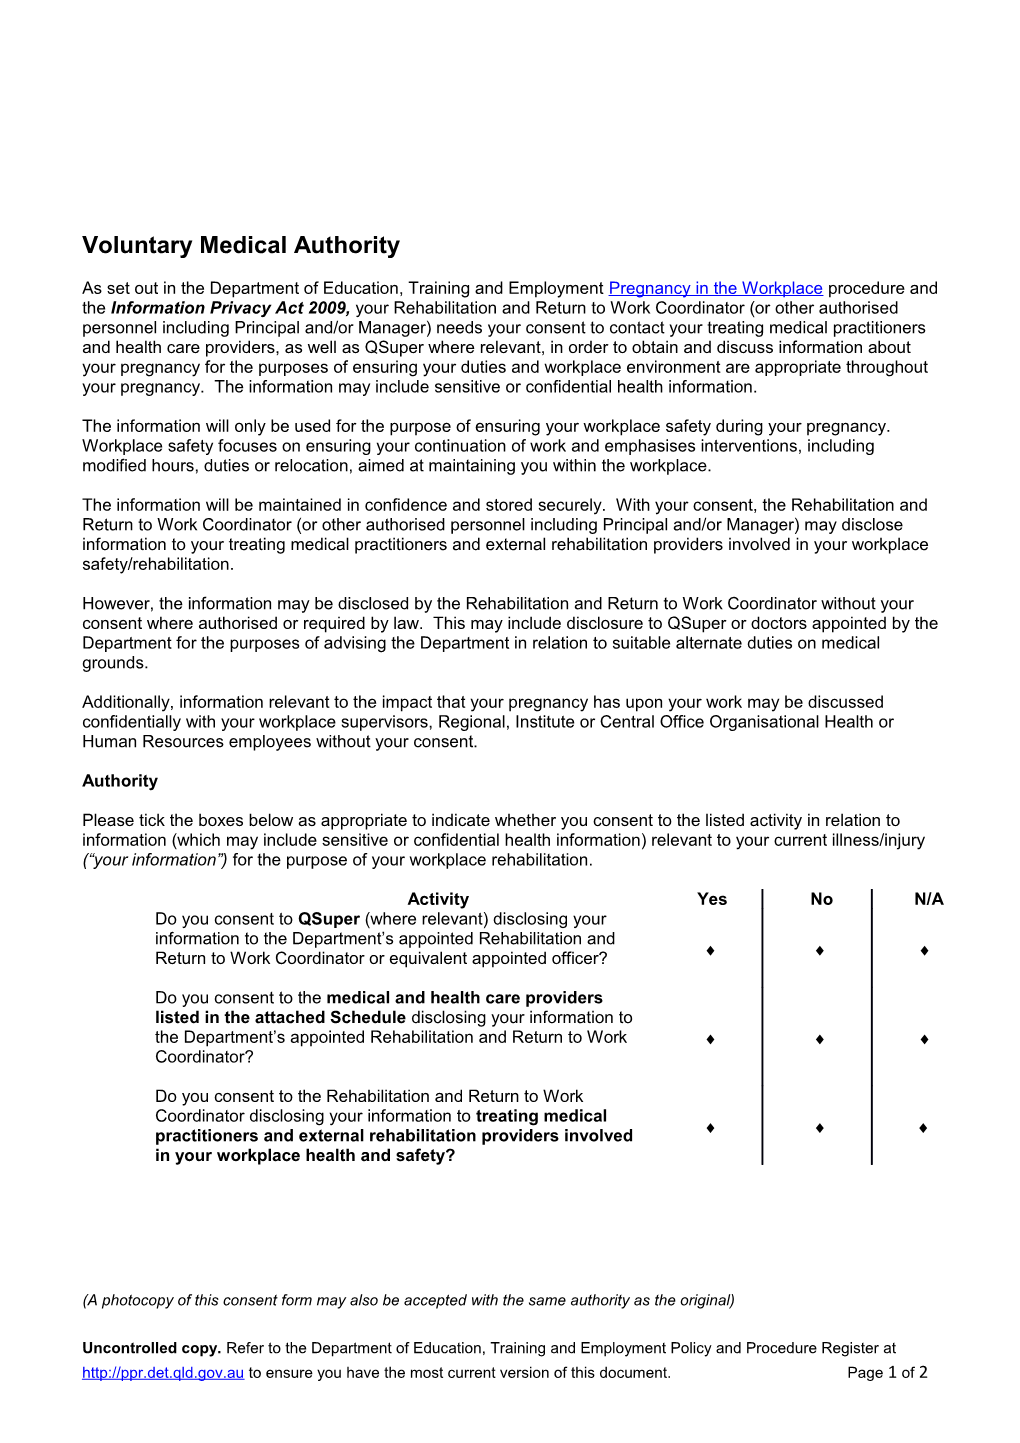 Pregnancy in the Workplace Voluntary Medical Authority